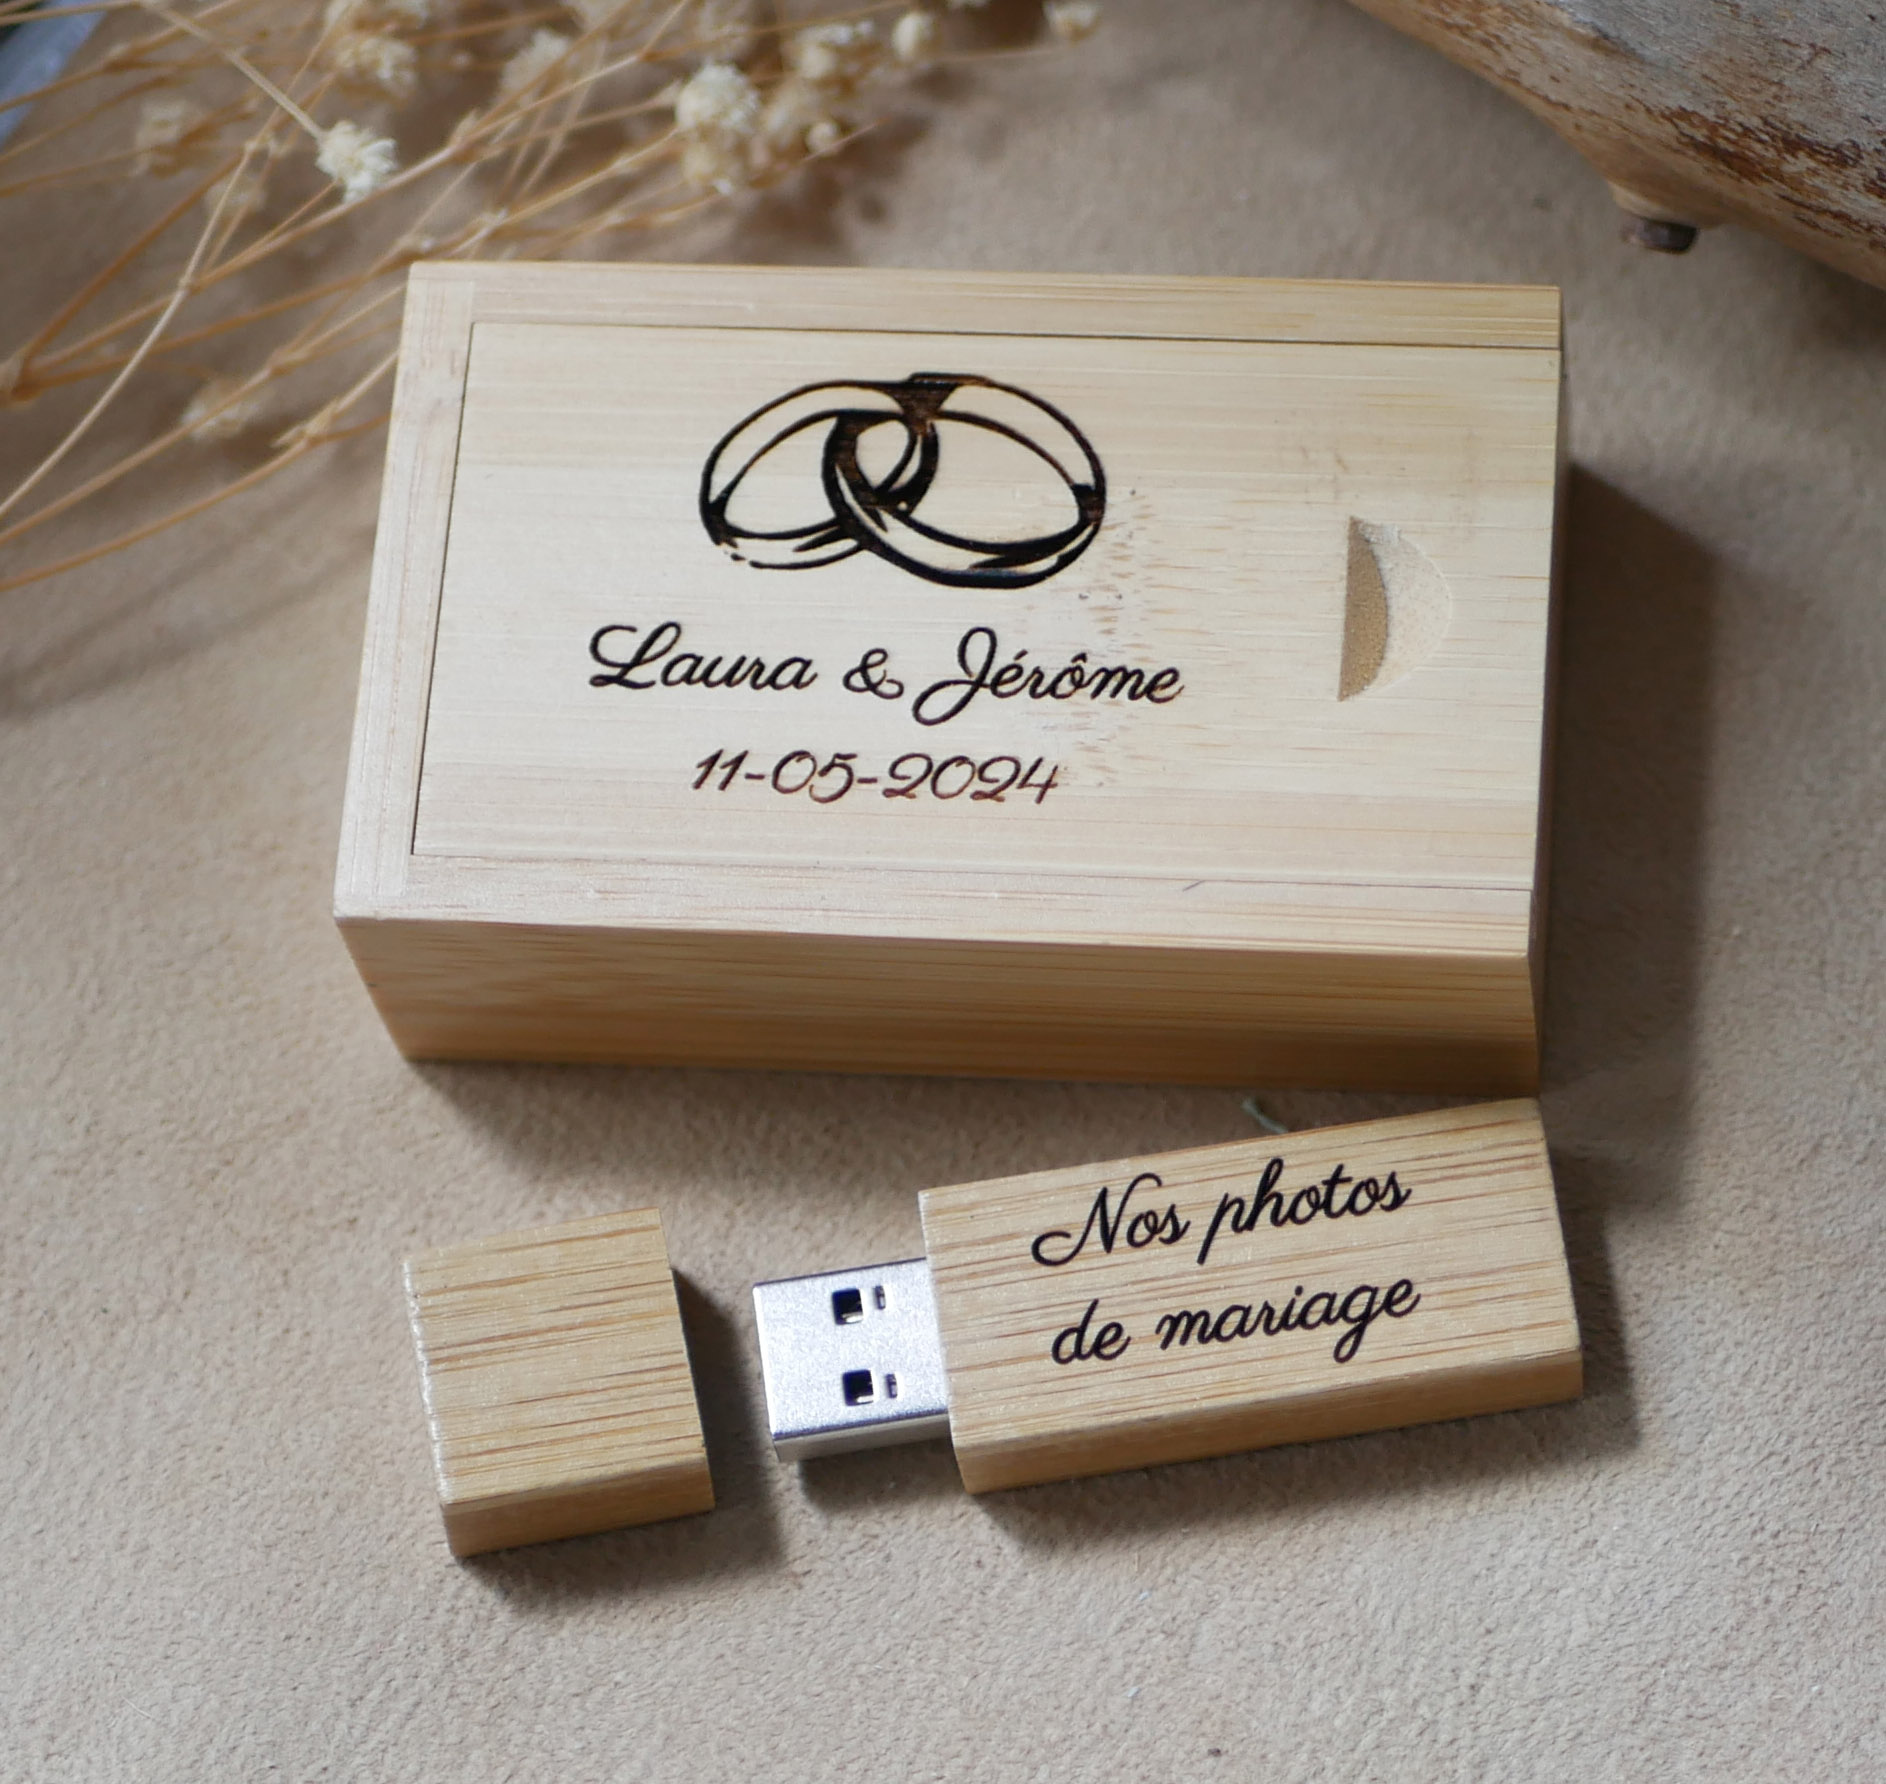 32 GB Usb 3.0 Key in bamboo wood case to be personalized by engraving 